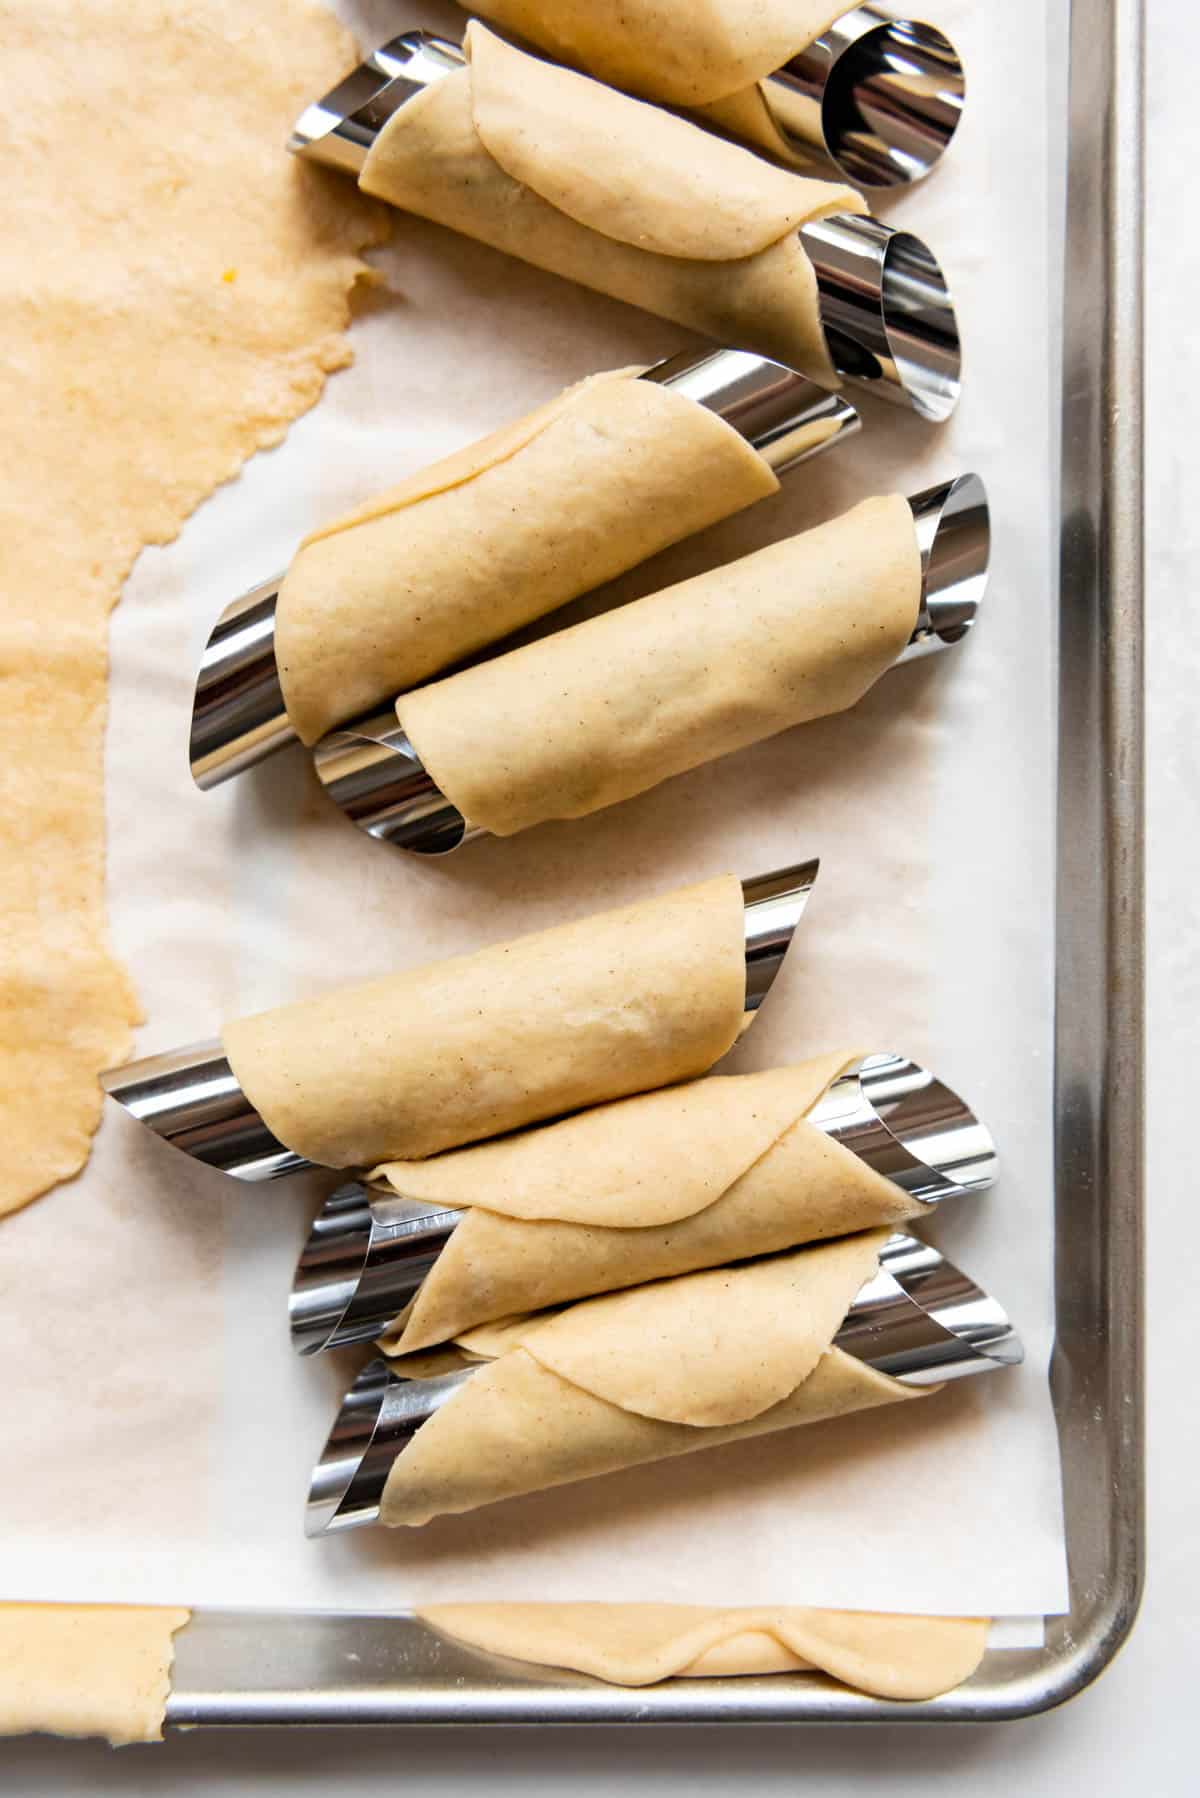 Cannoli dough wrapped around metal cannoli forms before frying.